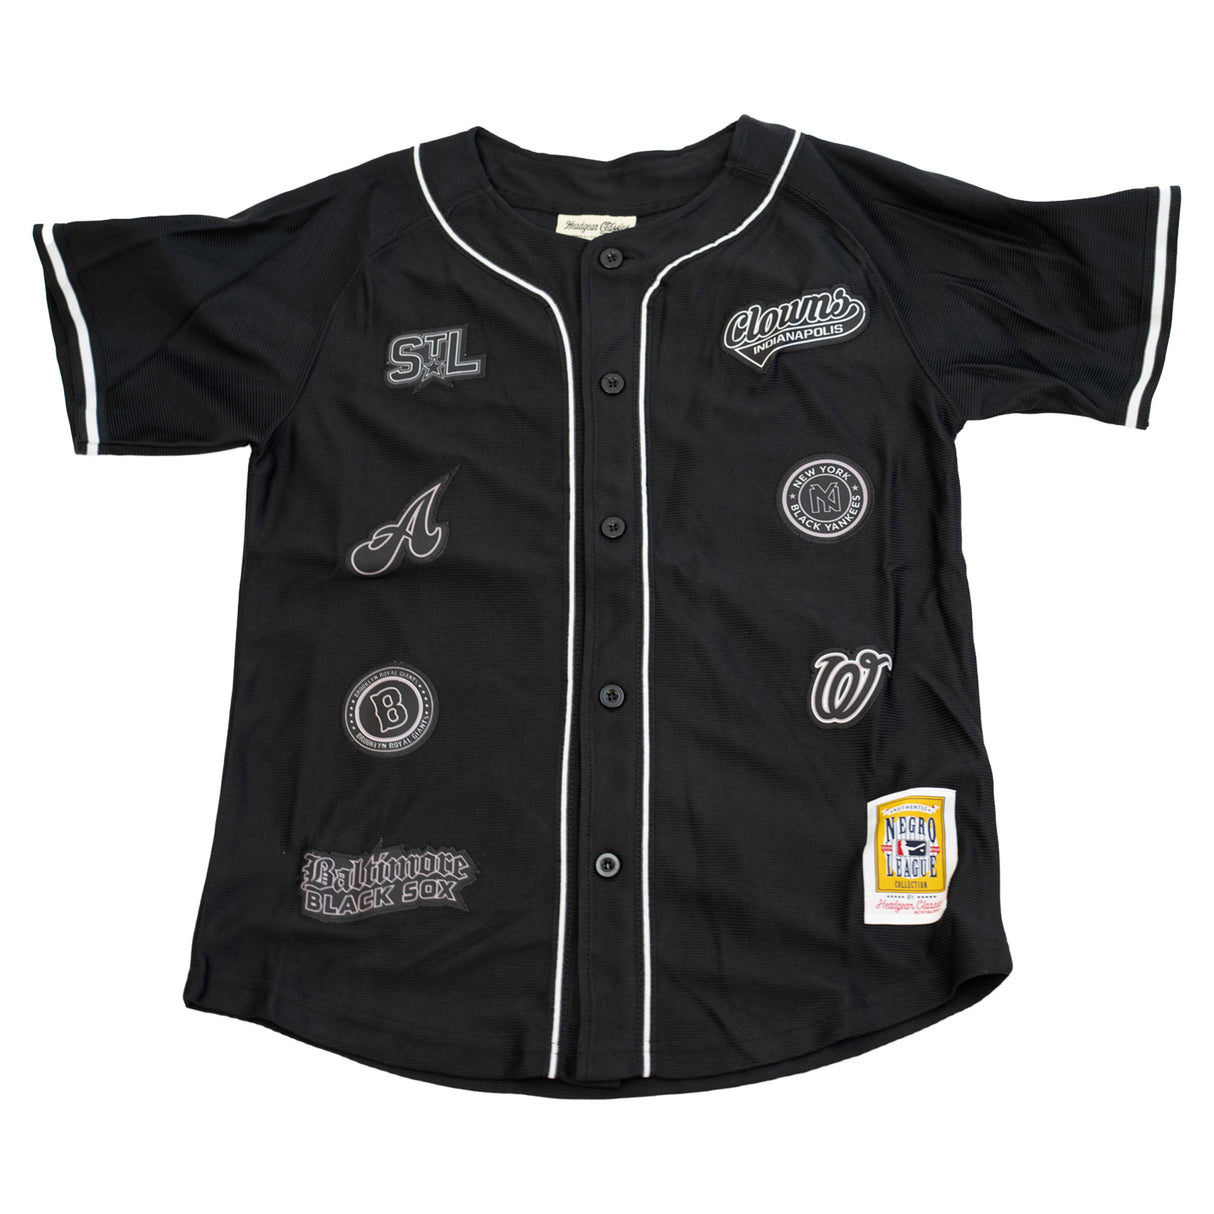 YOUTH NERGO LEAGUE VERTICAL COLLAGE BUTTOM DOWN BASEBALL JERSEY (BLACK)